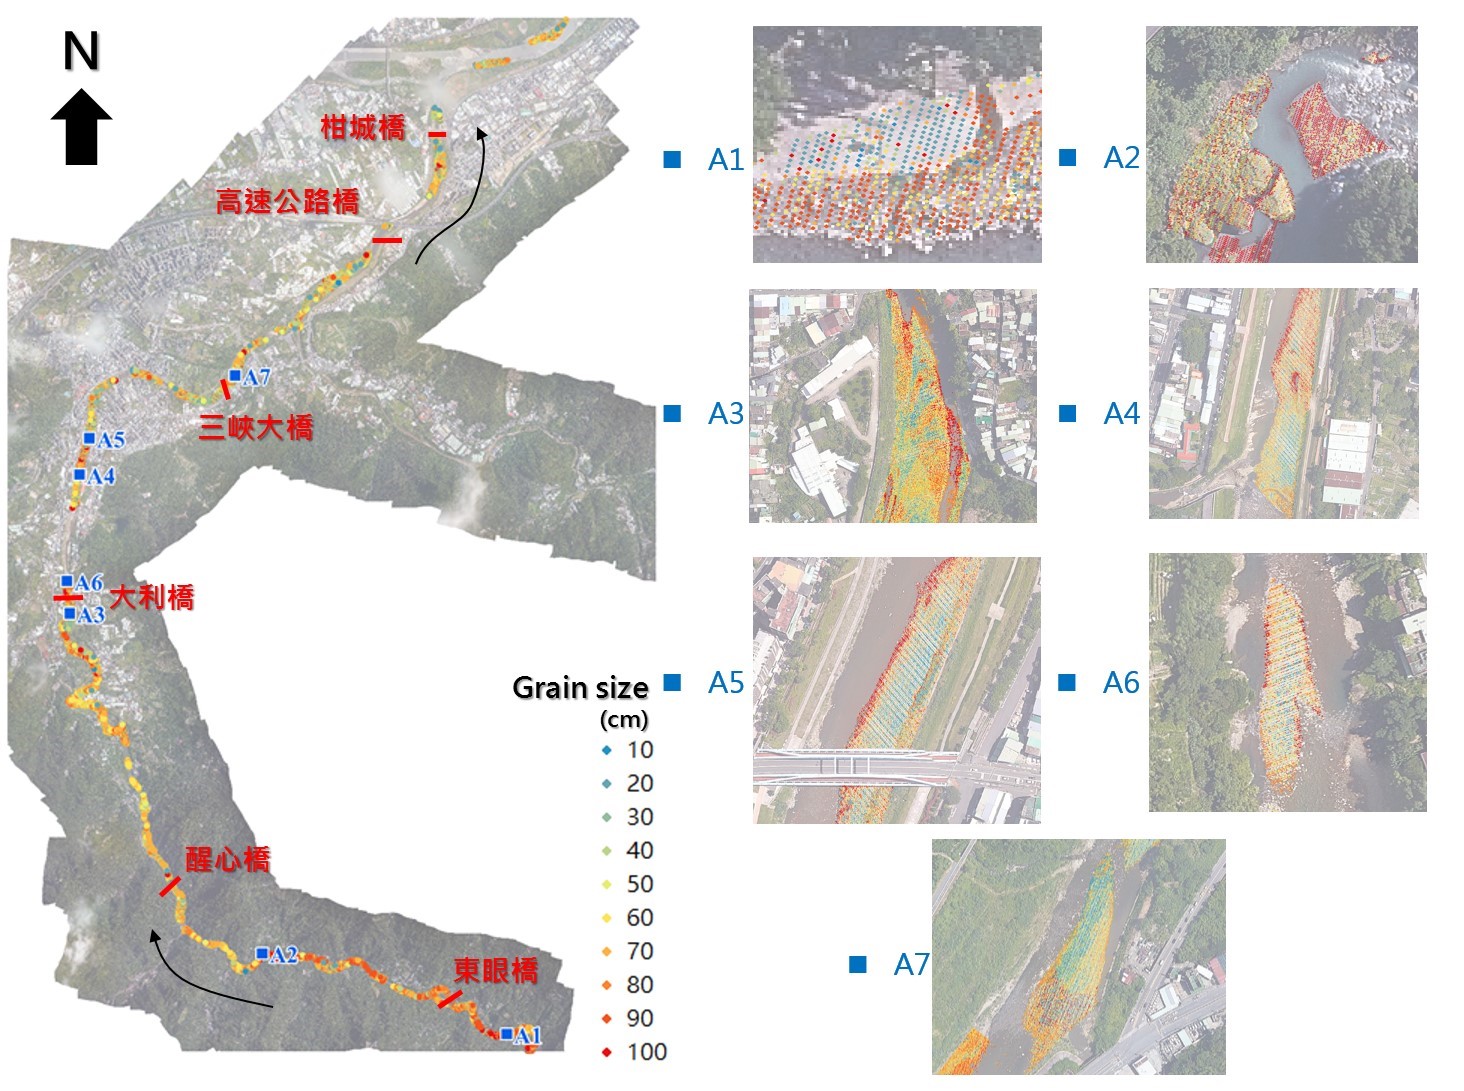 Figure 1. The standard Sub-footprint LiDAR templates detect river particle sizes from 10 cm to 100 cm.